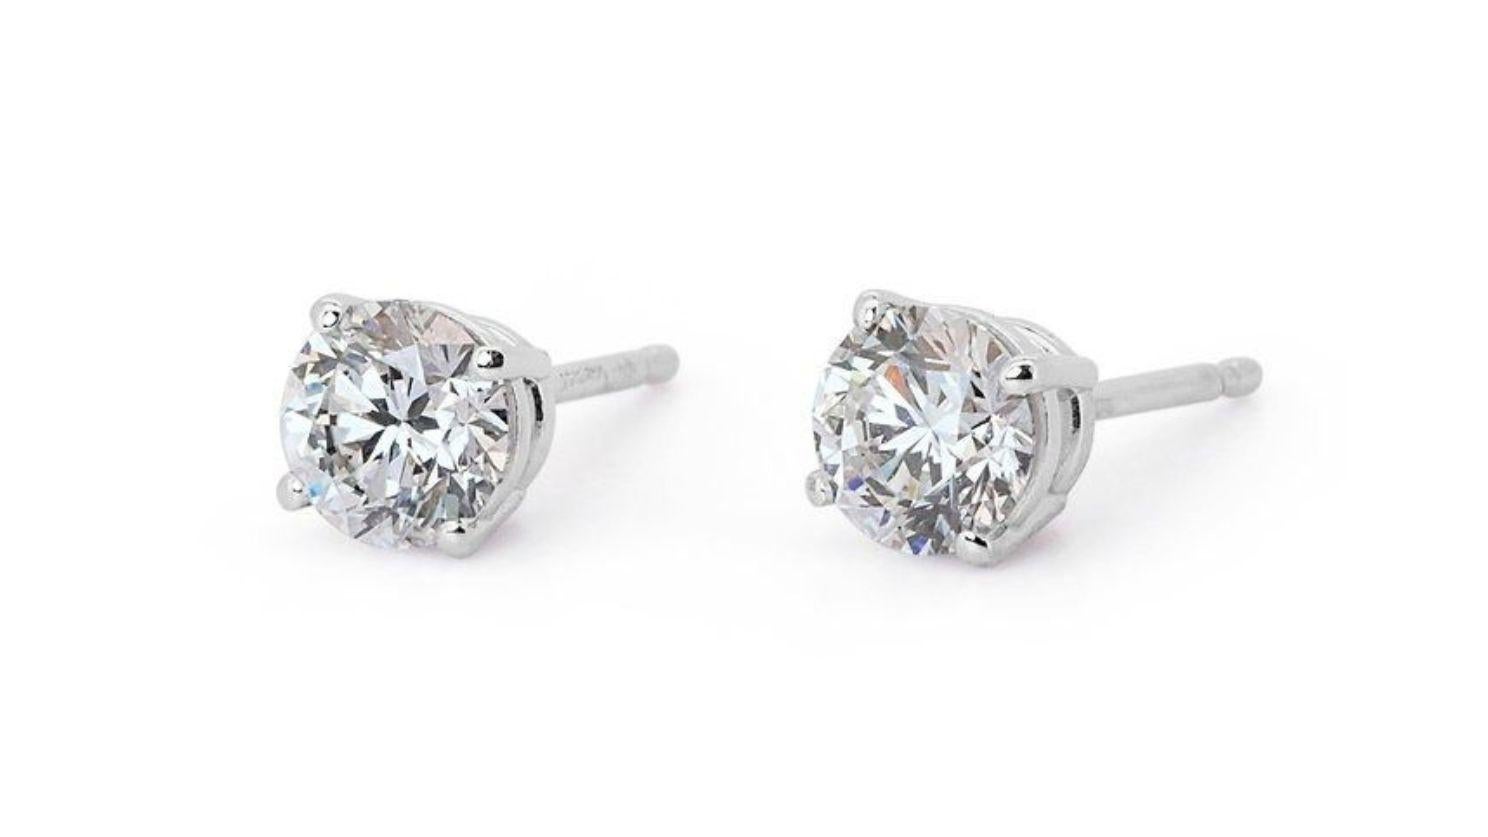 Introducing our exquisite Dazzling 1.41ct Round Brilliant Diamond Stud Earrings, crafted to captivate and enchant. Each earring boasts a stunning 1.41-carat round brilliant-cut diamond, meticulously selected for its exceptional quality and